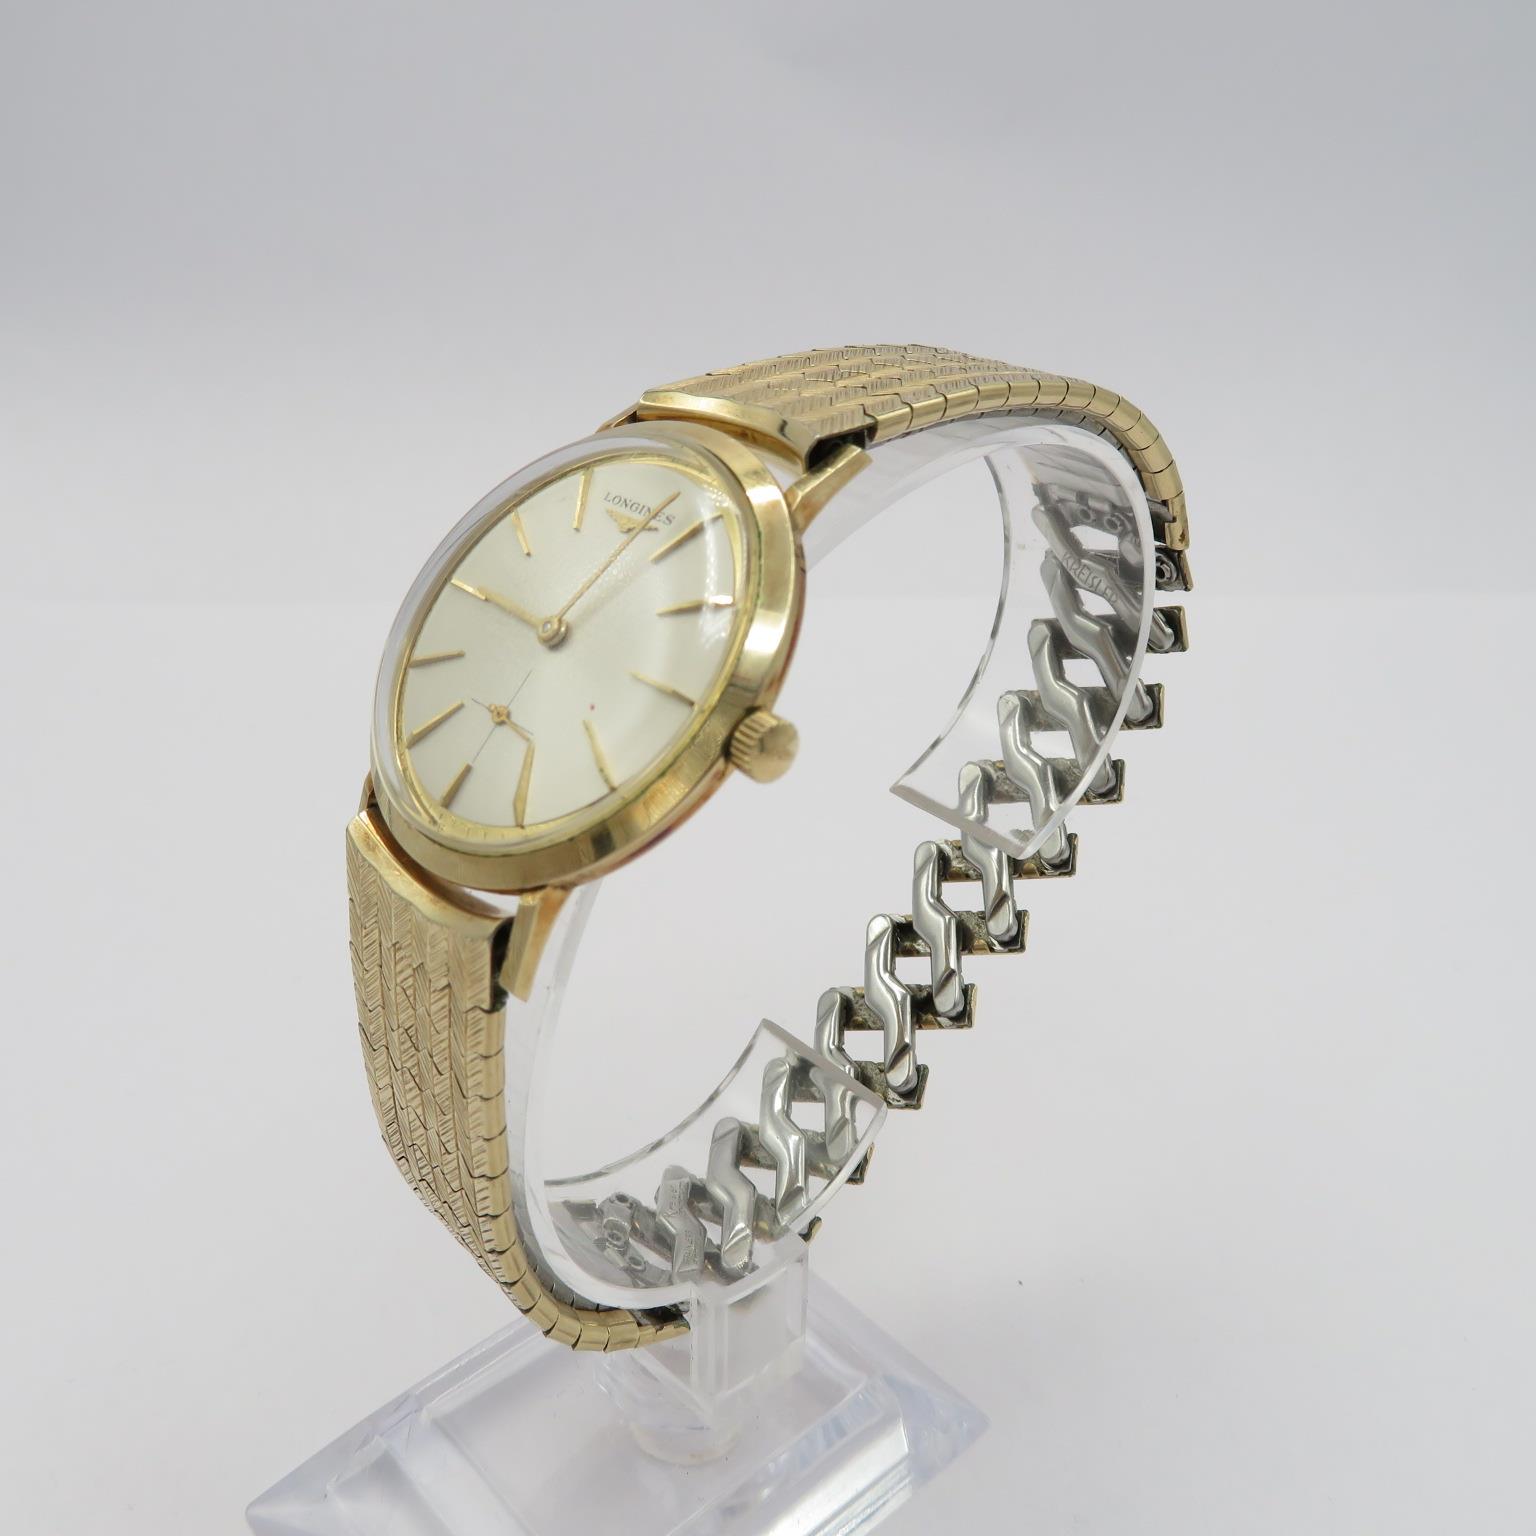 Longines 10 ct gold filled ref 1200 gents vintage gold filled wristwatch handwind working flying - Image 3 of 8